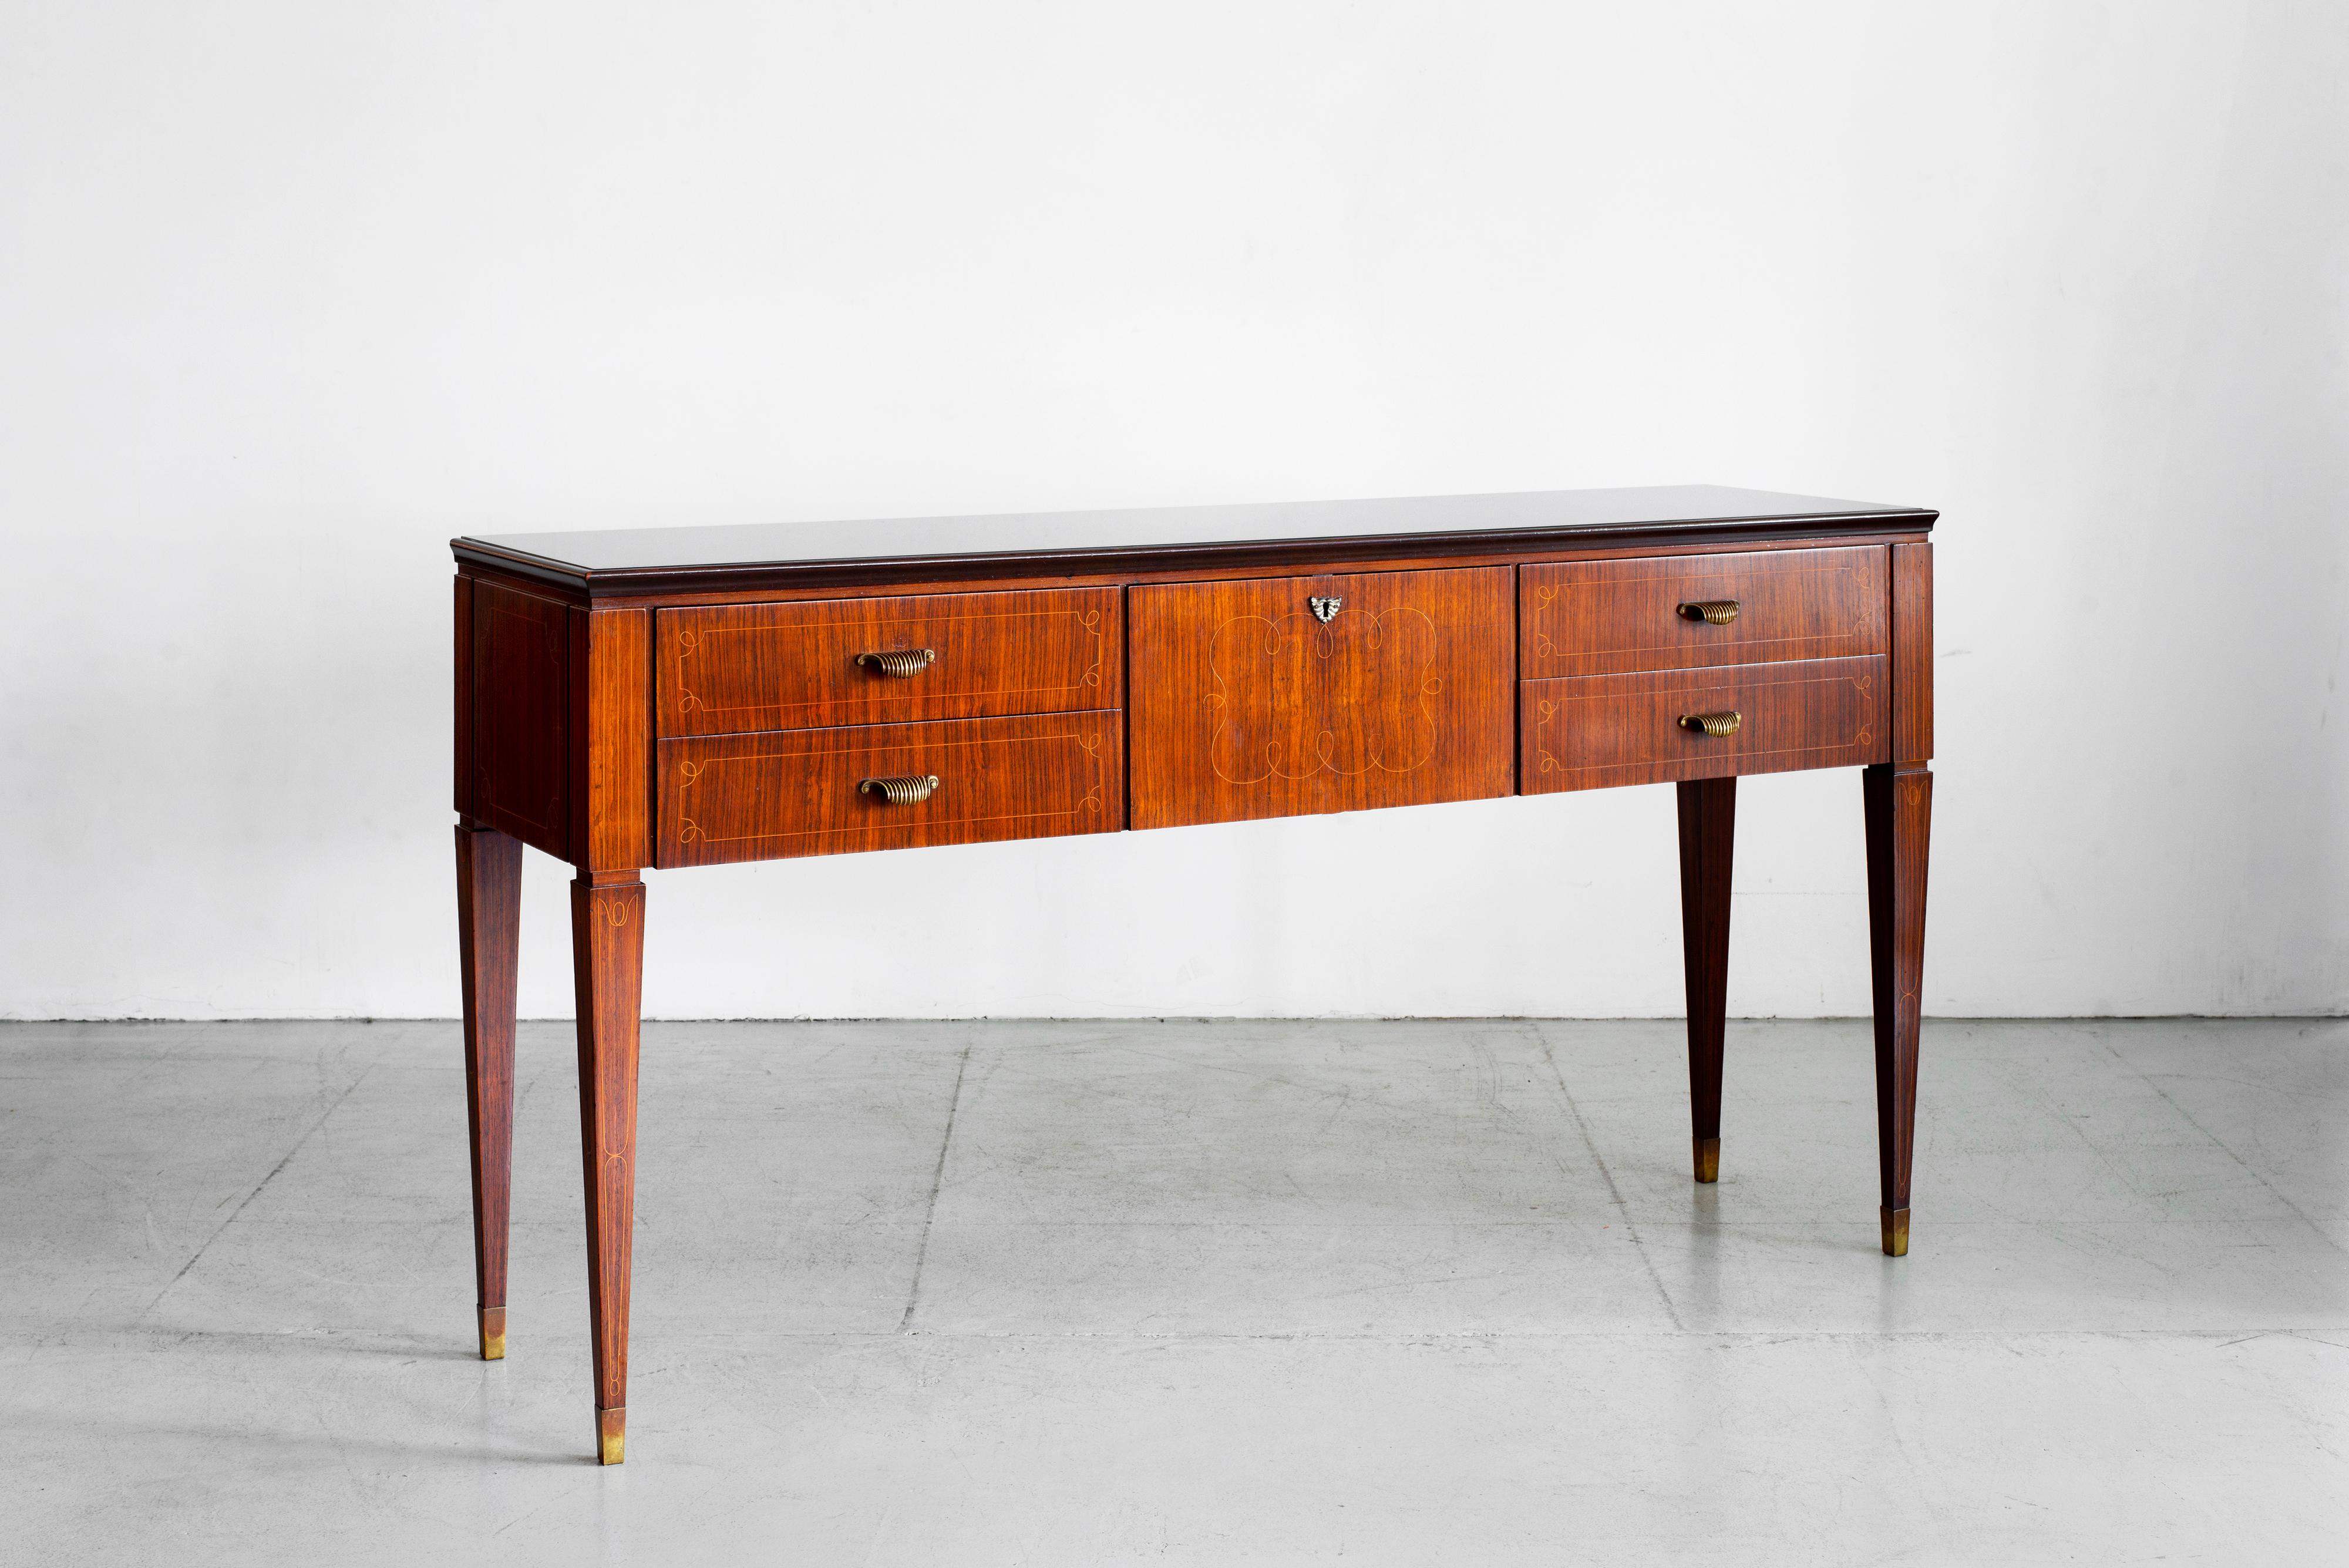 Gorgeous sideboard attributed to Paolo Buffa, circa 1940's
Rosewood with opaque black glass top and tapered legs 
Beautiful brass scalloped handles.
Four drawers with ornate inlay 
1 cabinet door with original key opens for more storage.